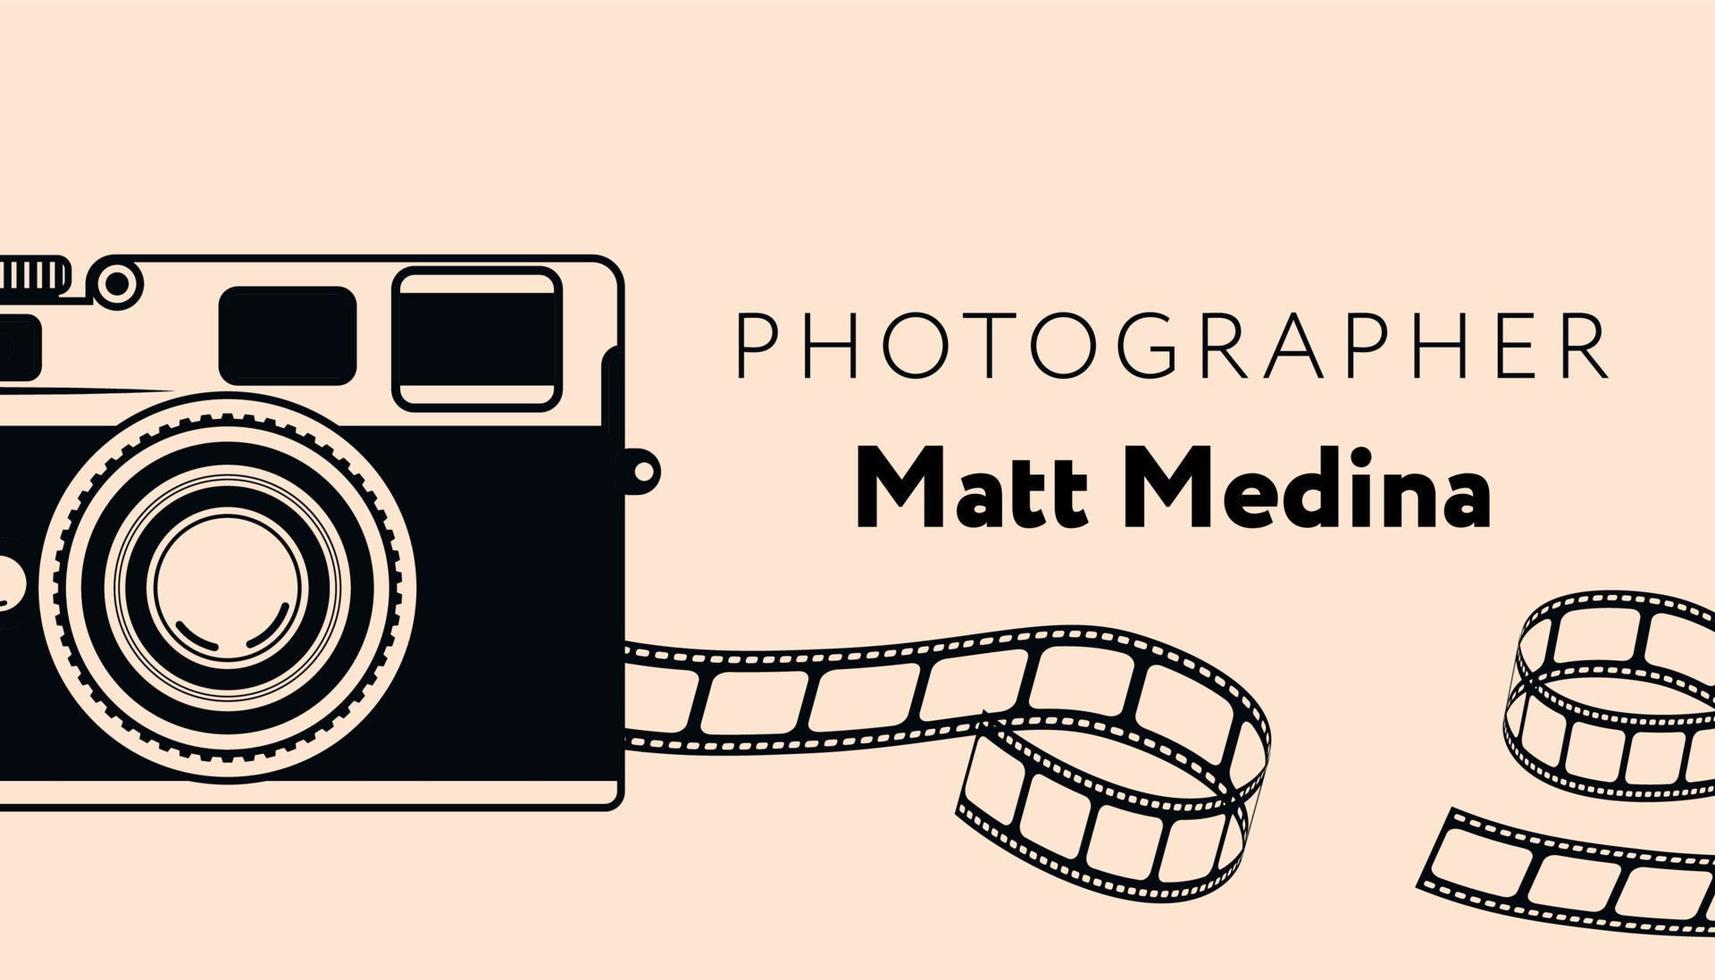 Photographer business card or banner with services vector